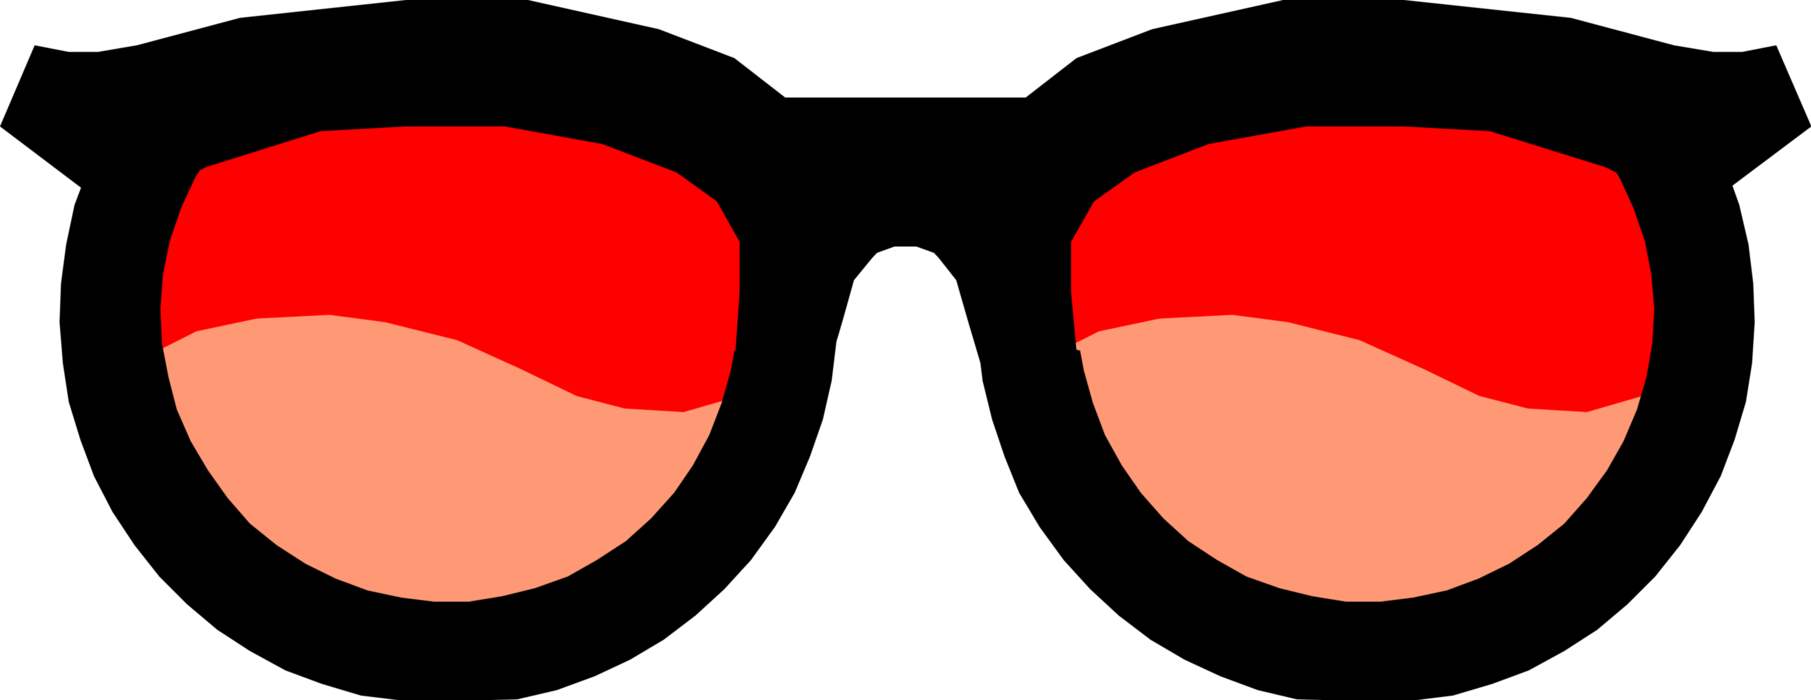 Vector Illustration of Sunglasses or Sun Glasses are Protective Eyewear